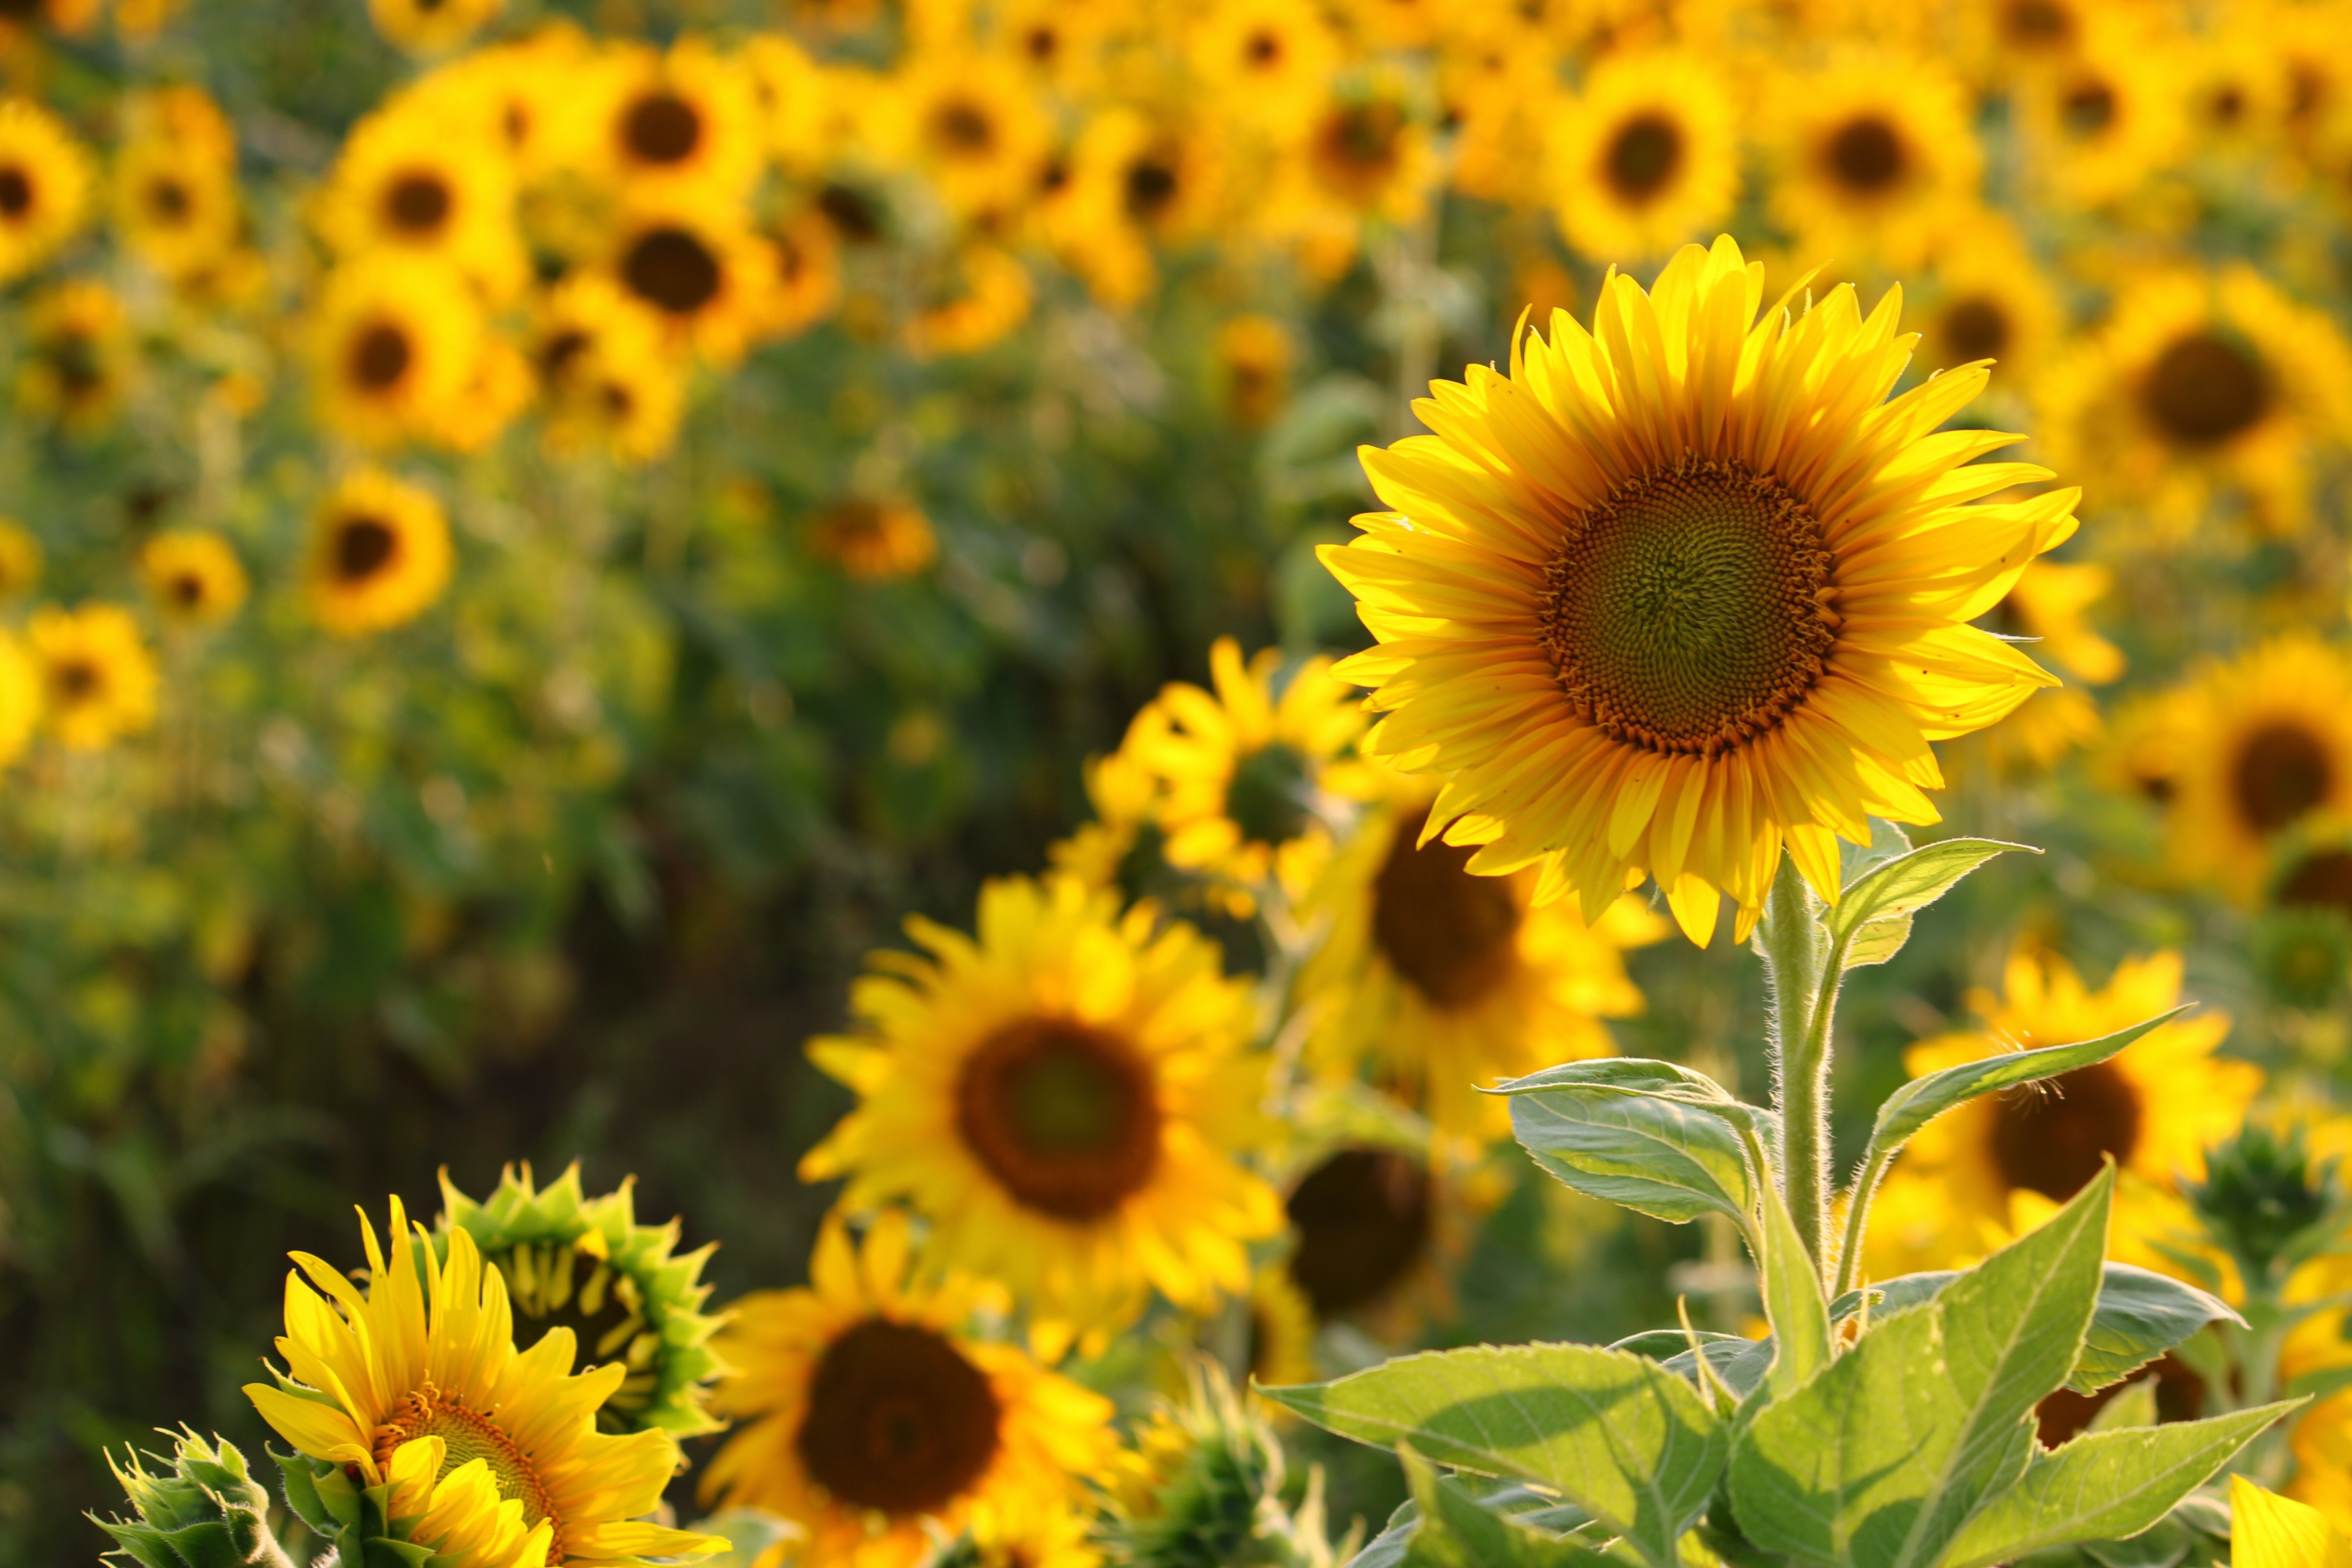 Image of Sunflowers summer plants and flowers